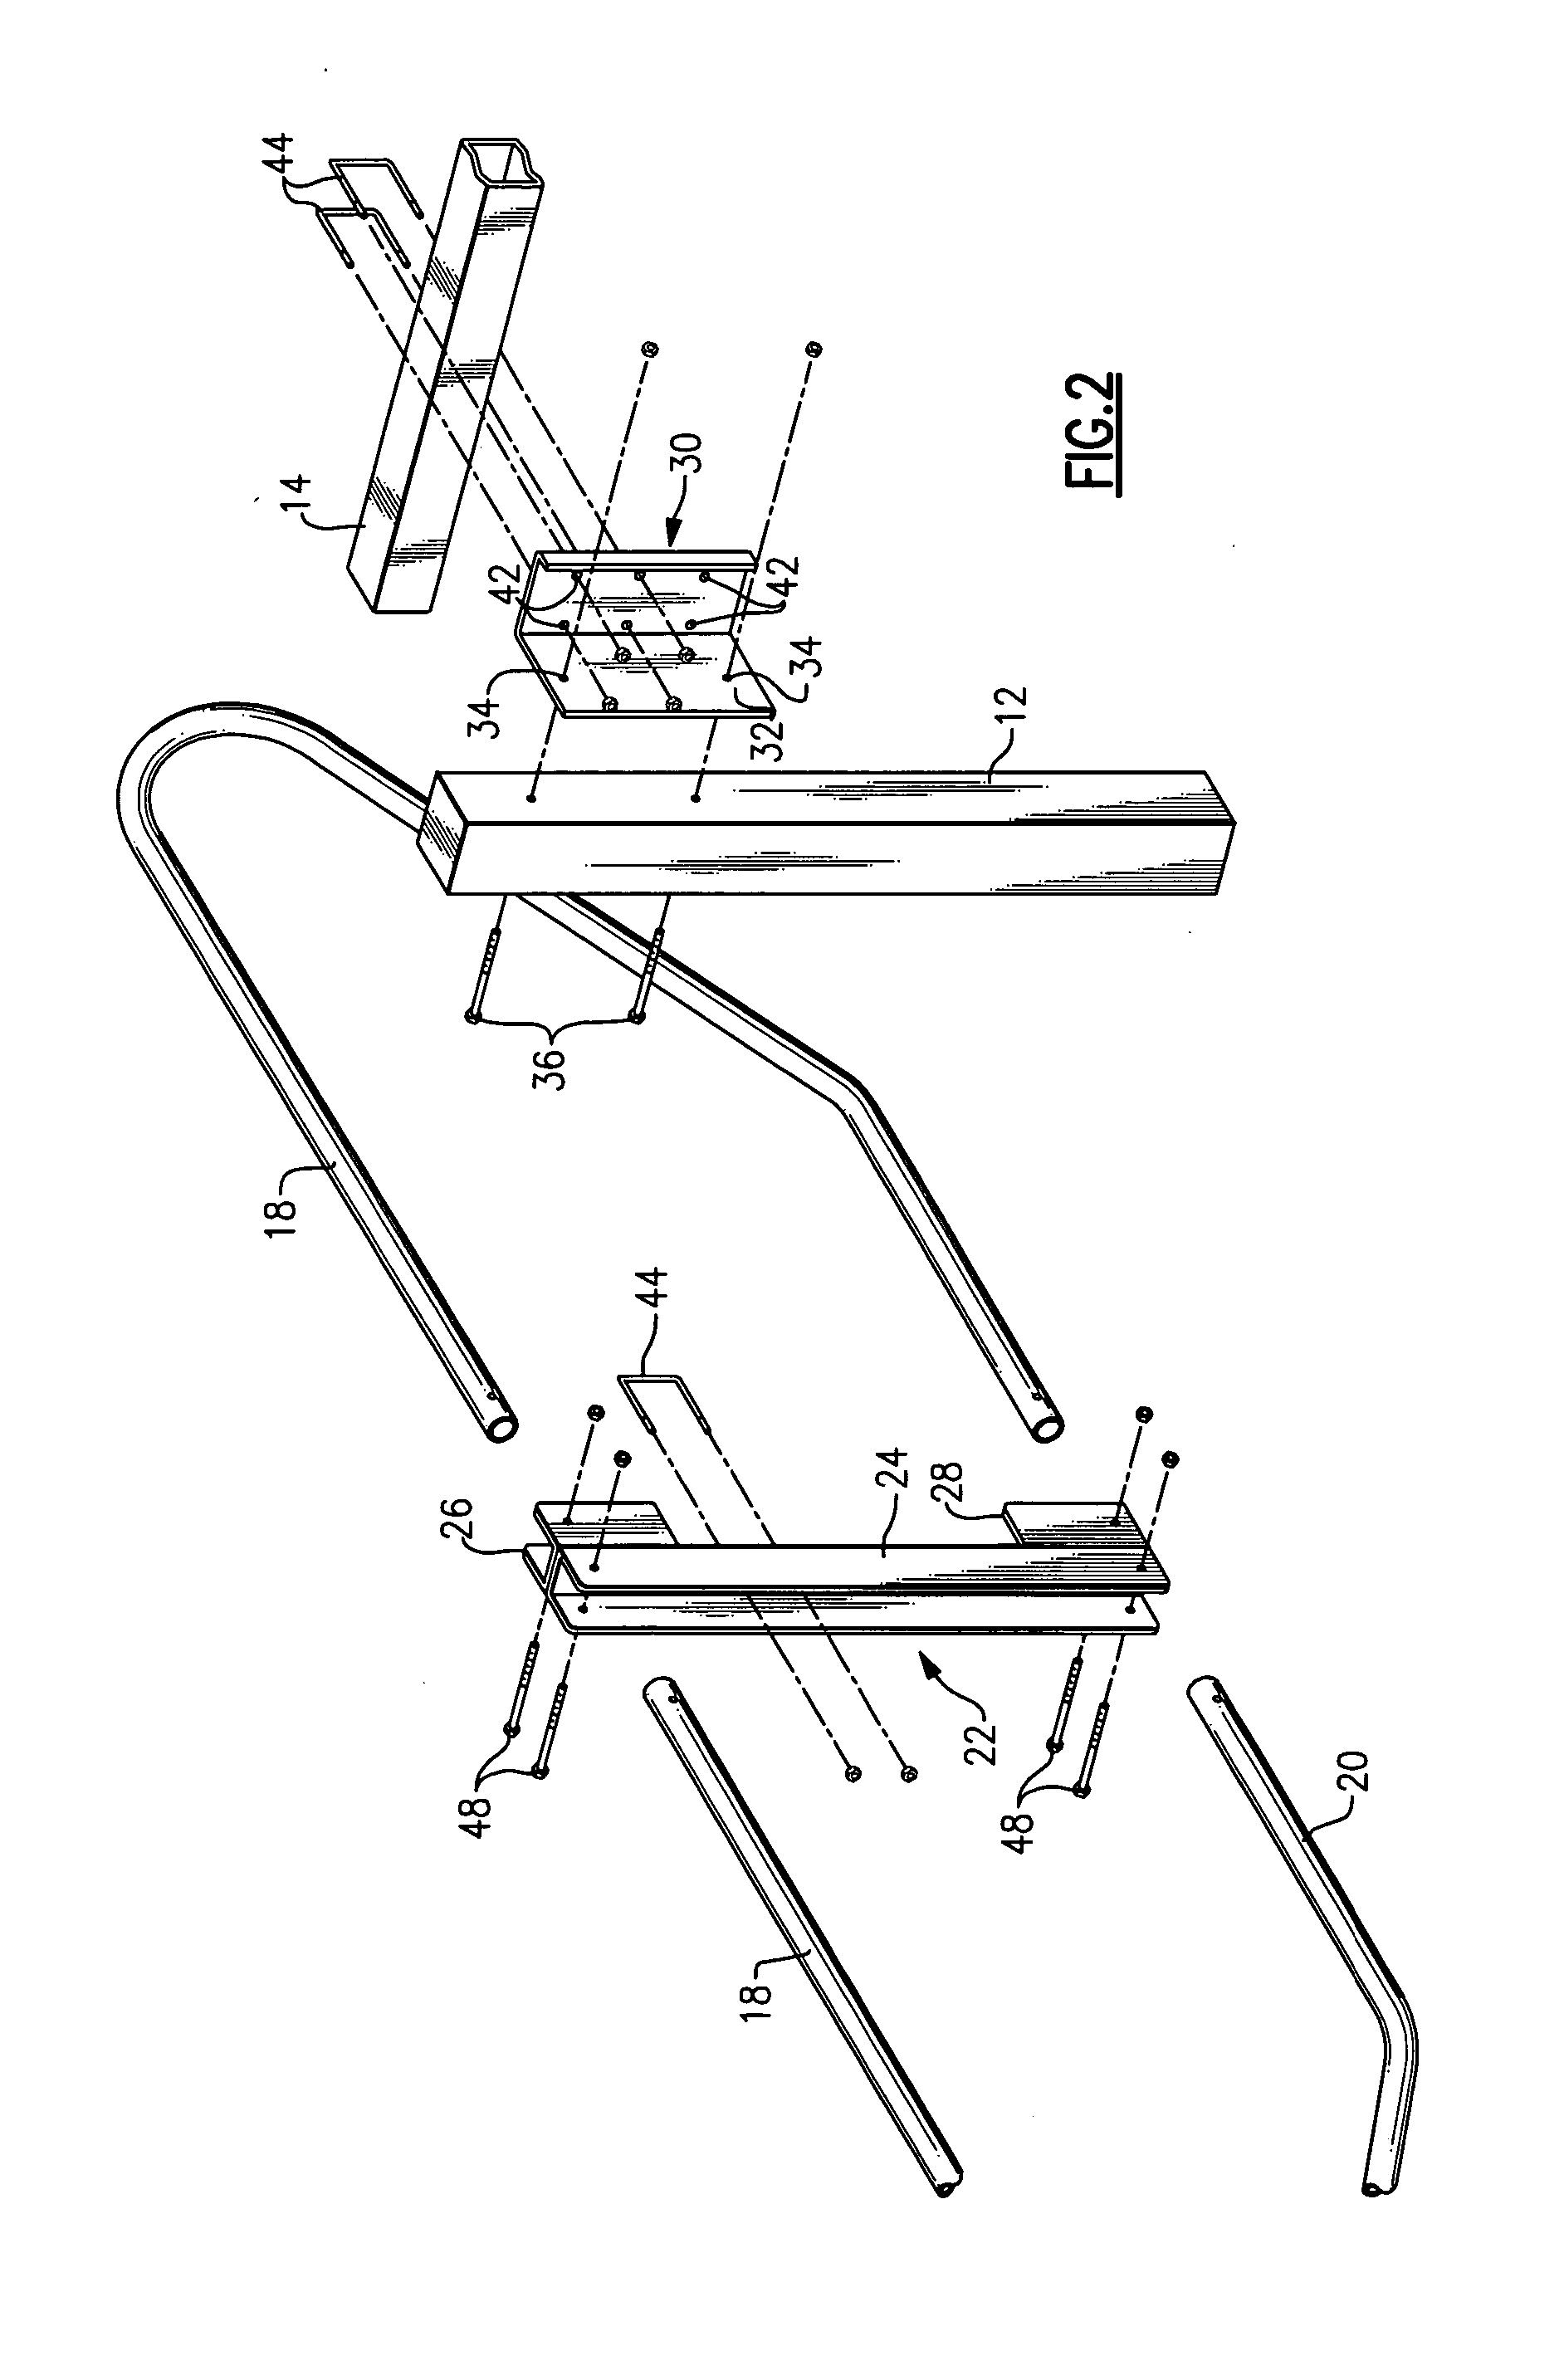 Channel stanchion for elevated beam cow stall assembly